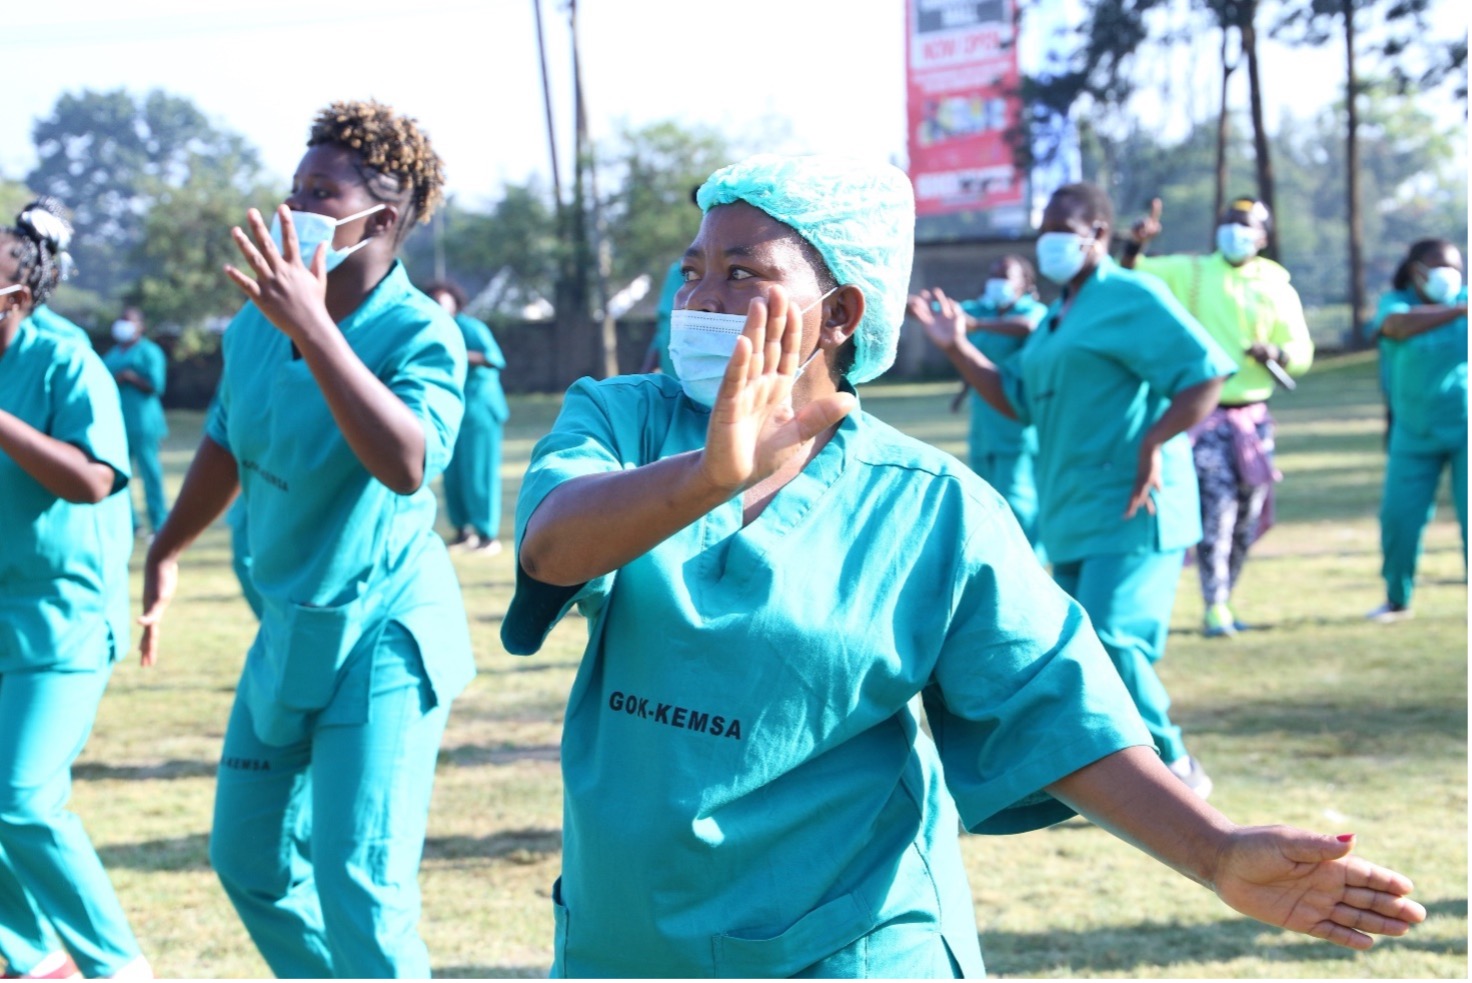 Boosting Healthcare Workers' Psychosocial Wellbeing through Zumba